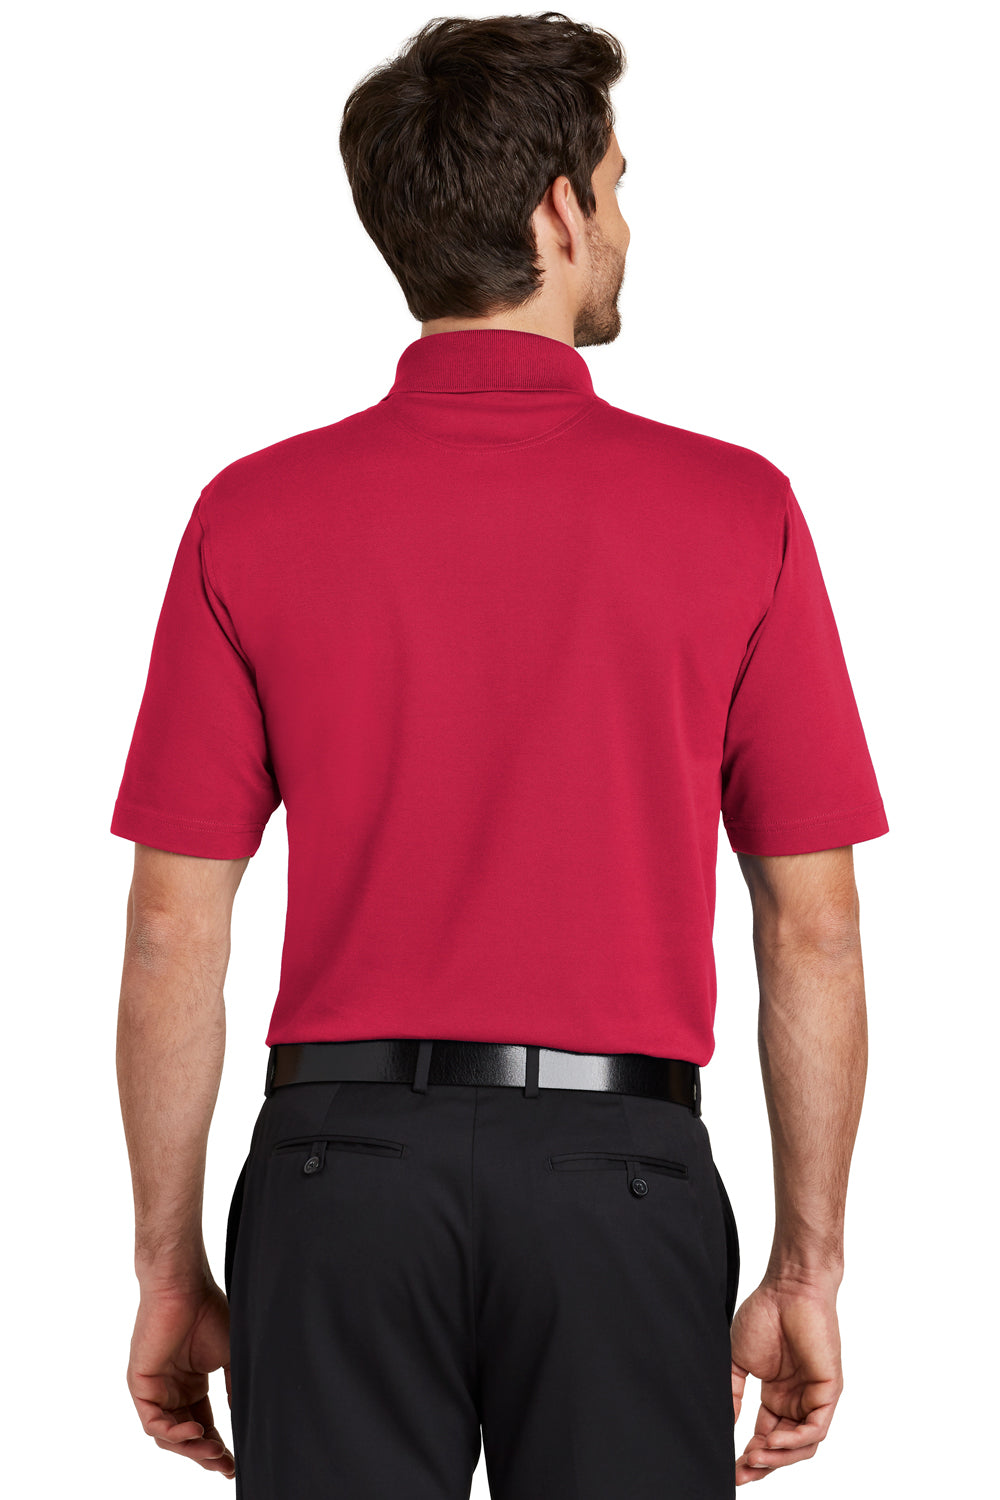 Port Authority K455 Mens Rapid Dry Moisture Wicking Short Sleeve Polo Shirt Red Back